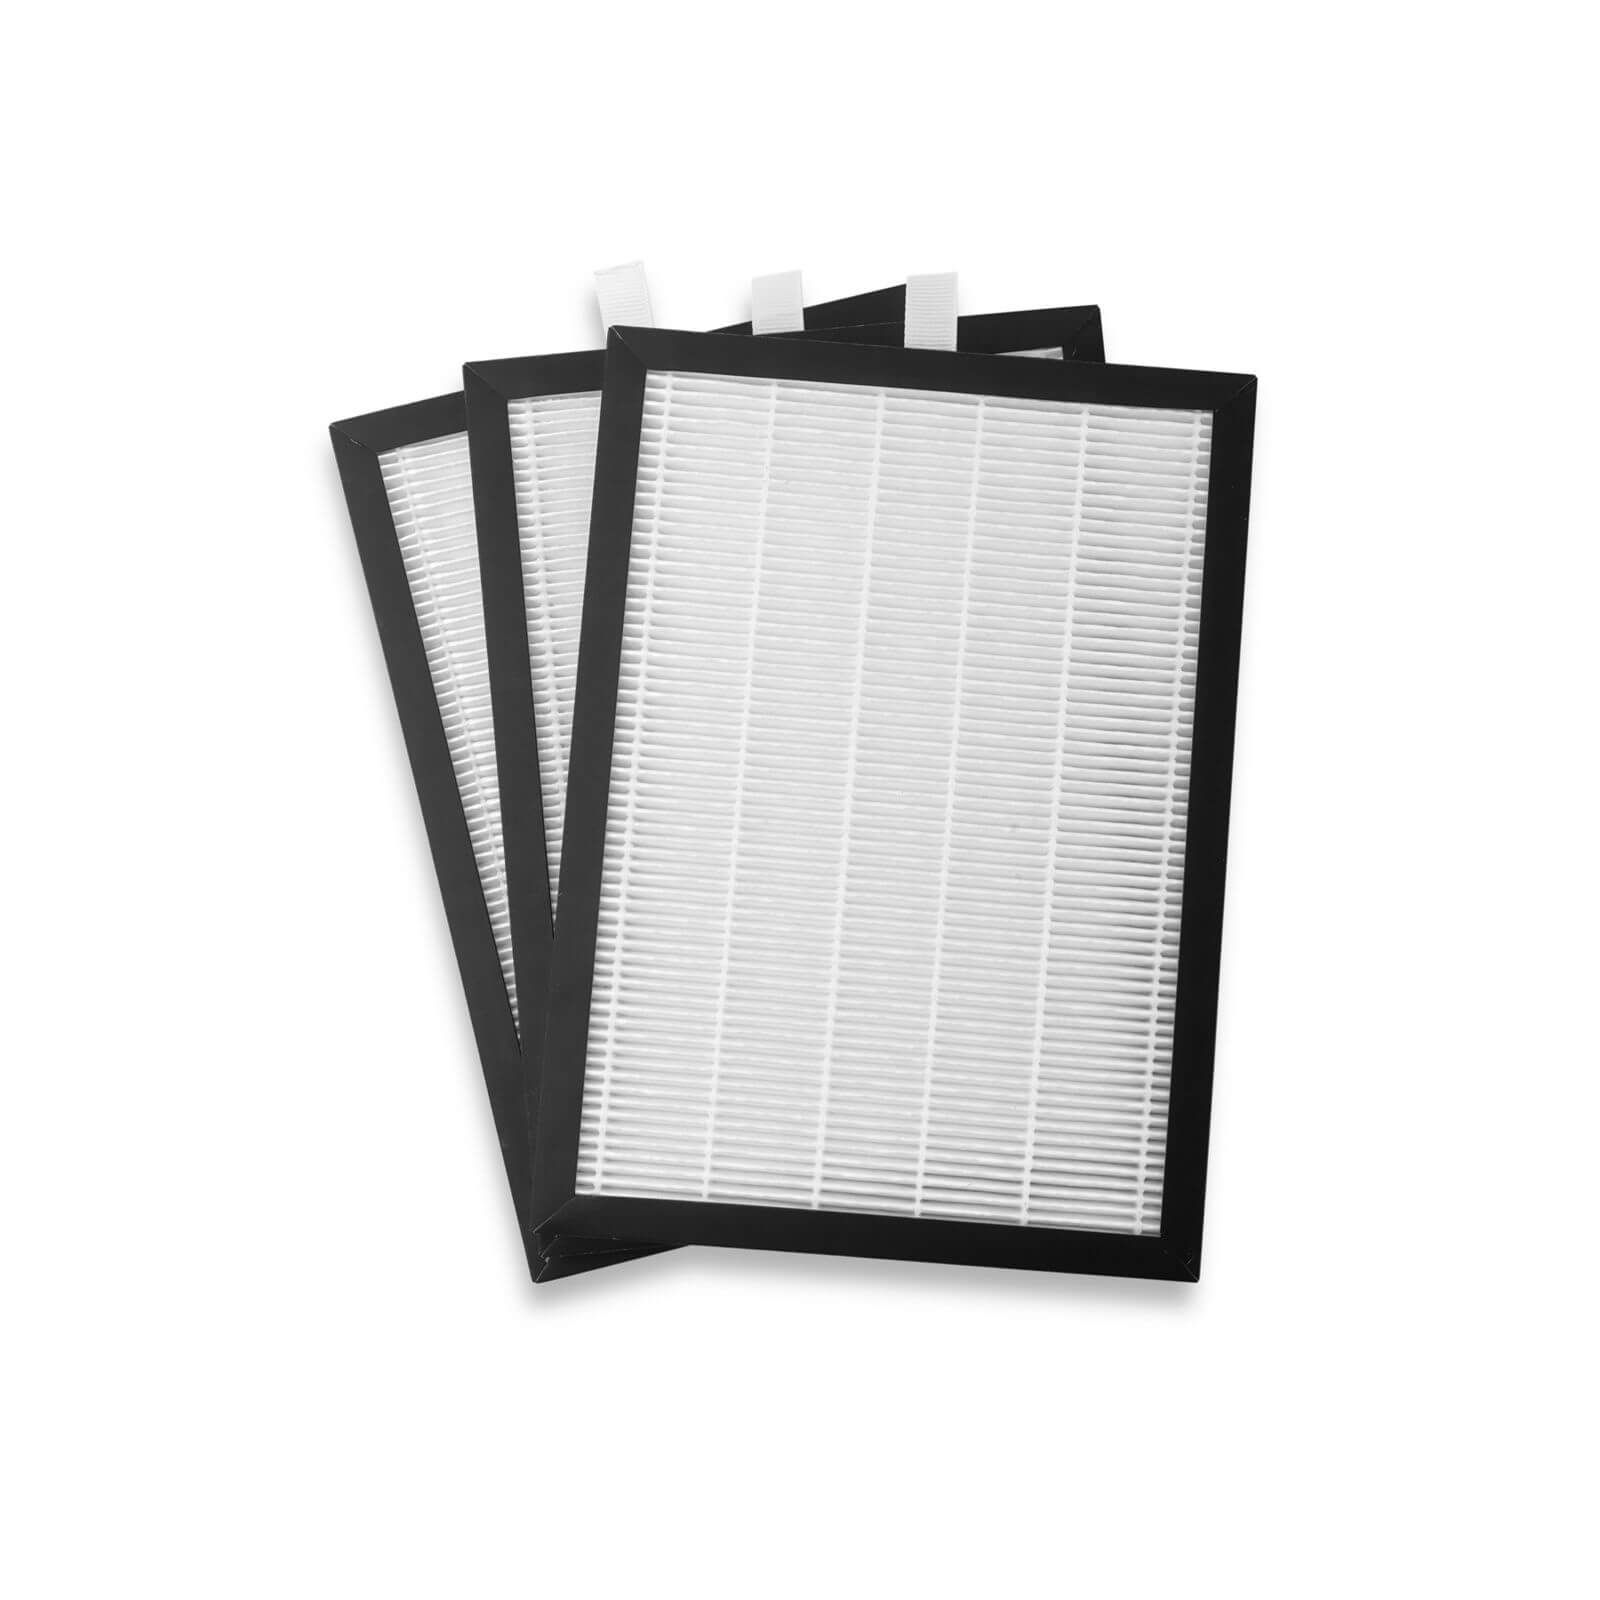 Meaco Low Energy Platinum Dehumidifier 12 Litre Replacement HEPA Filters - 3 Pack